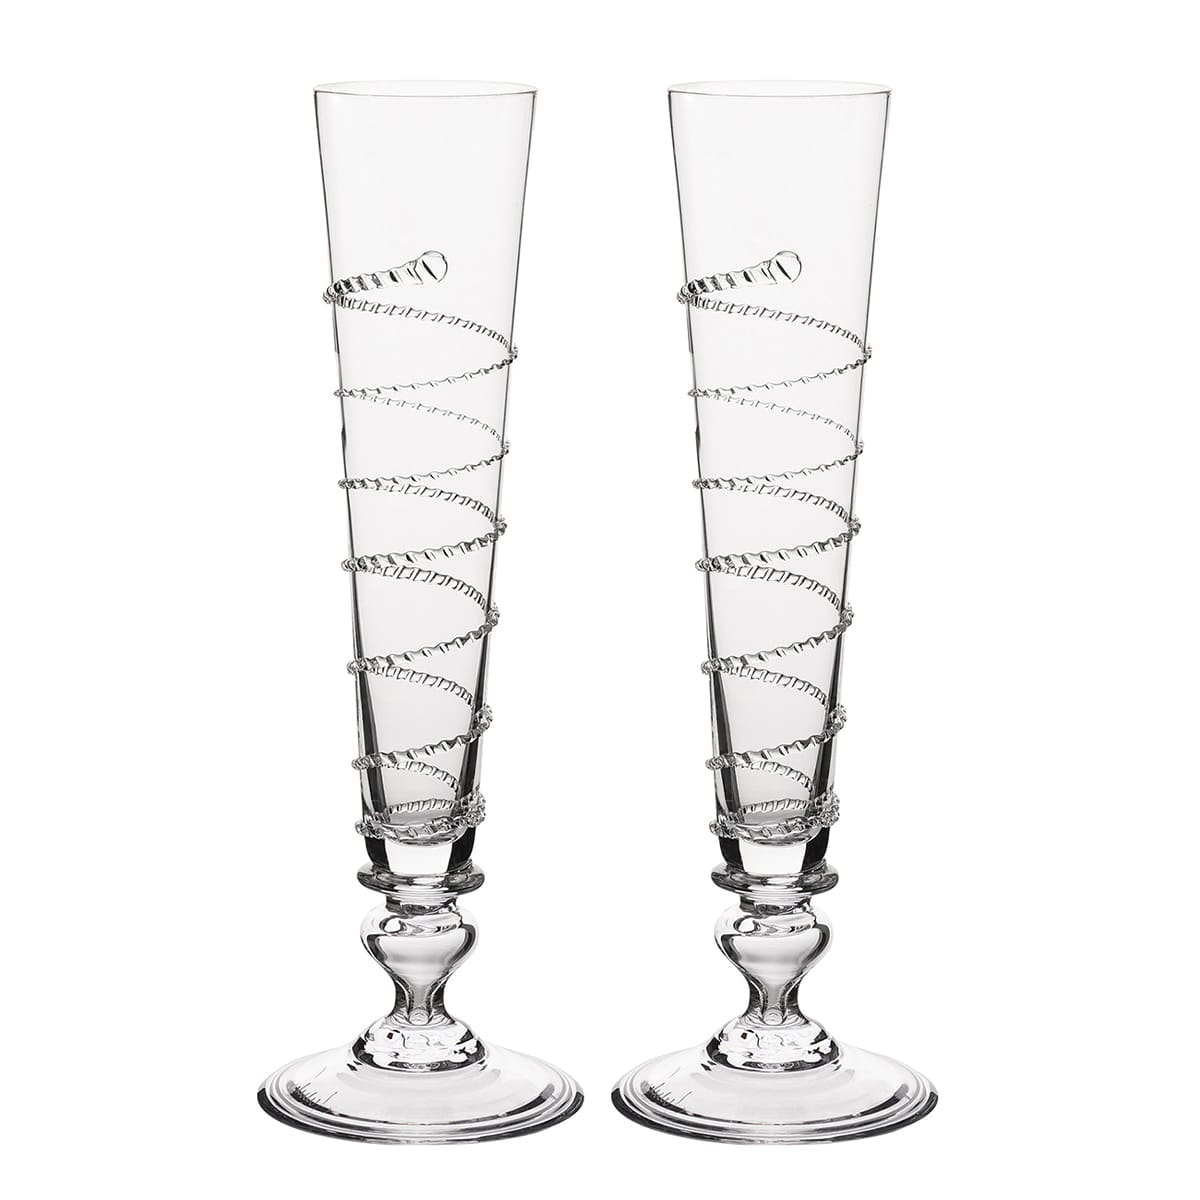 The Amalia Champagne Flute Set features a delicate swirl detail around the glass. Available at Mt. Pleasant home decor store GDC